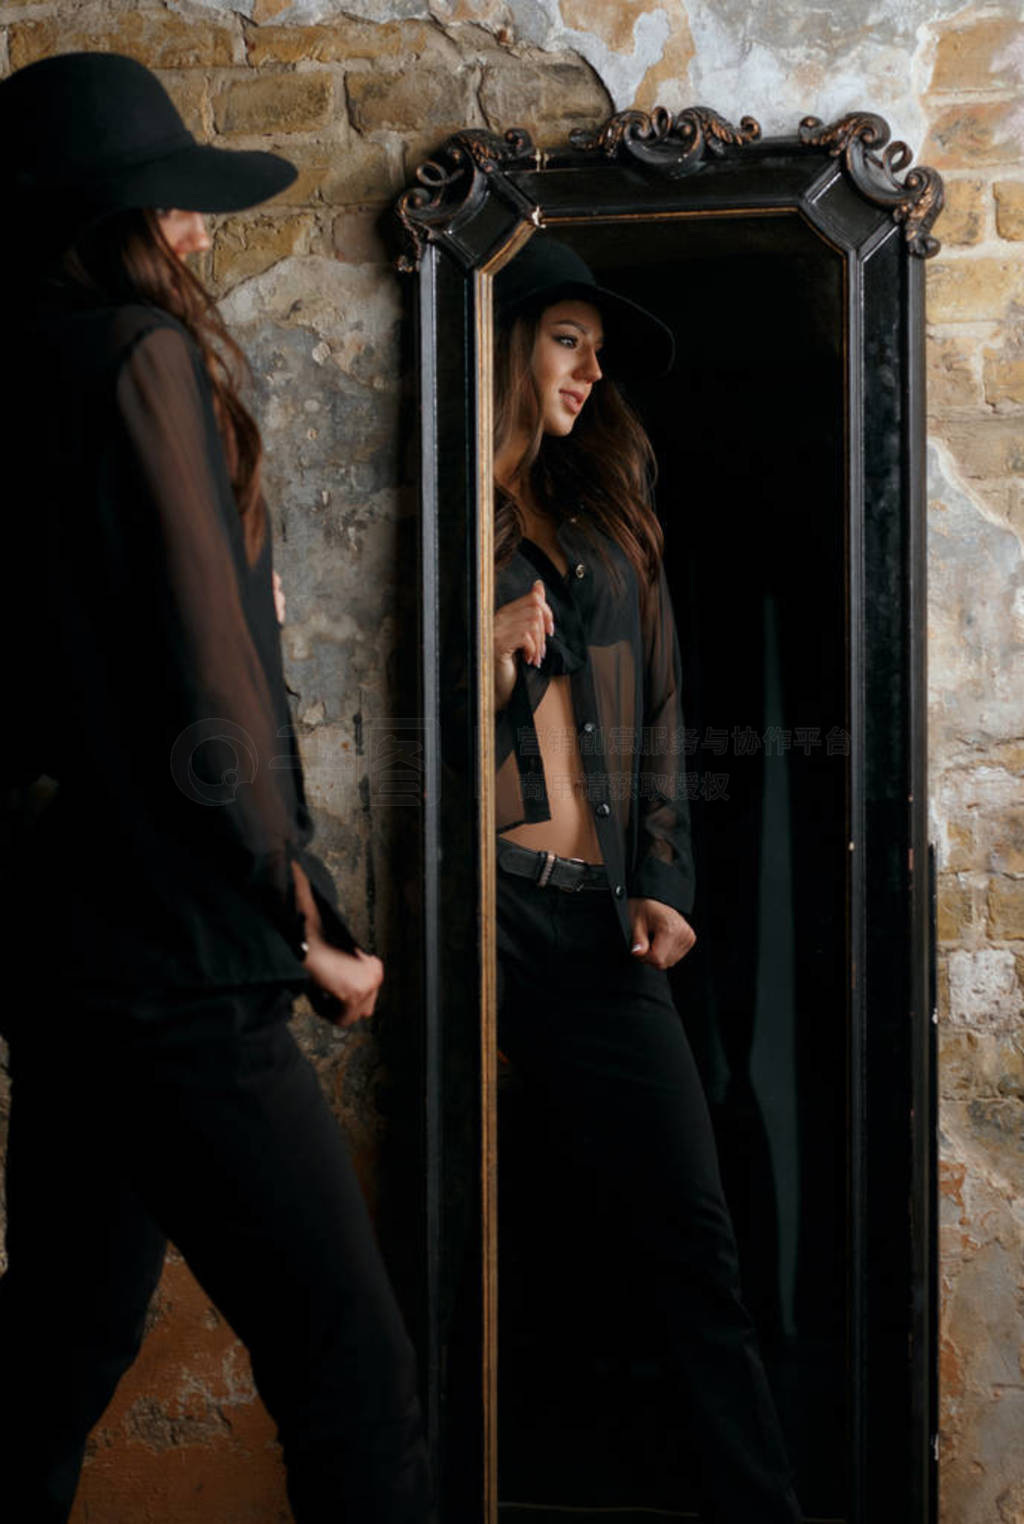 Young fashionable girl wearing stylish black outfit standing at